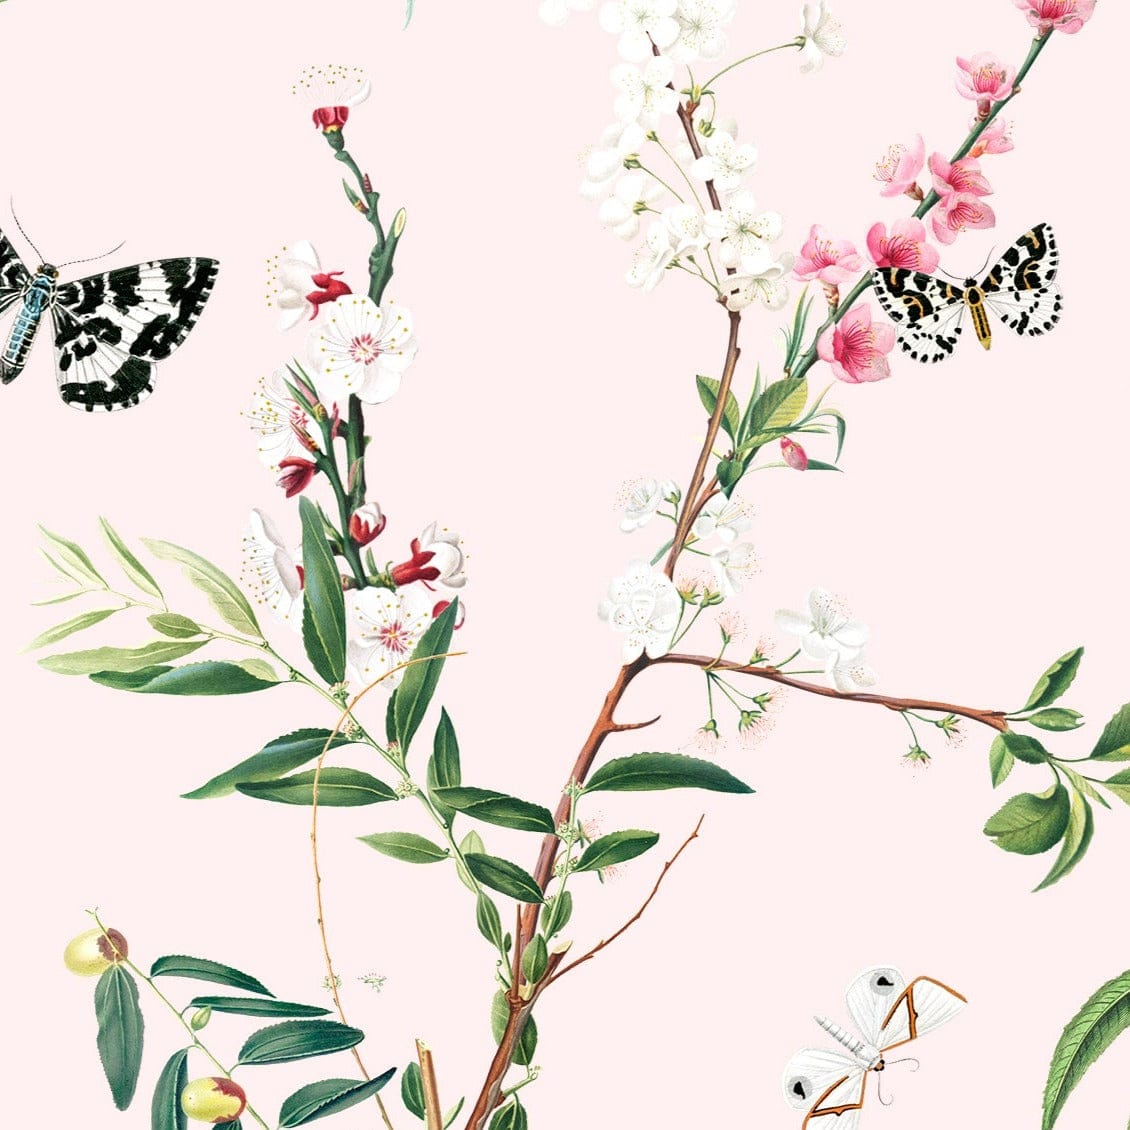 A detailed view of the Enchanting Butterflies Wallpaper, showcasing its intricate design of butterflies and blooming branches on a soft pink background. The delicate pattern features black and white butterflies and vibrant green leaves, creating a whimsical and serene ambiance.